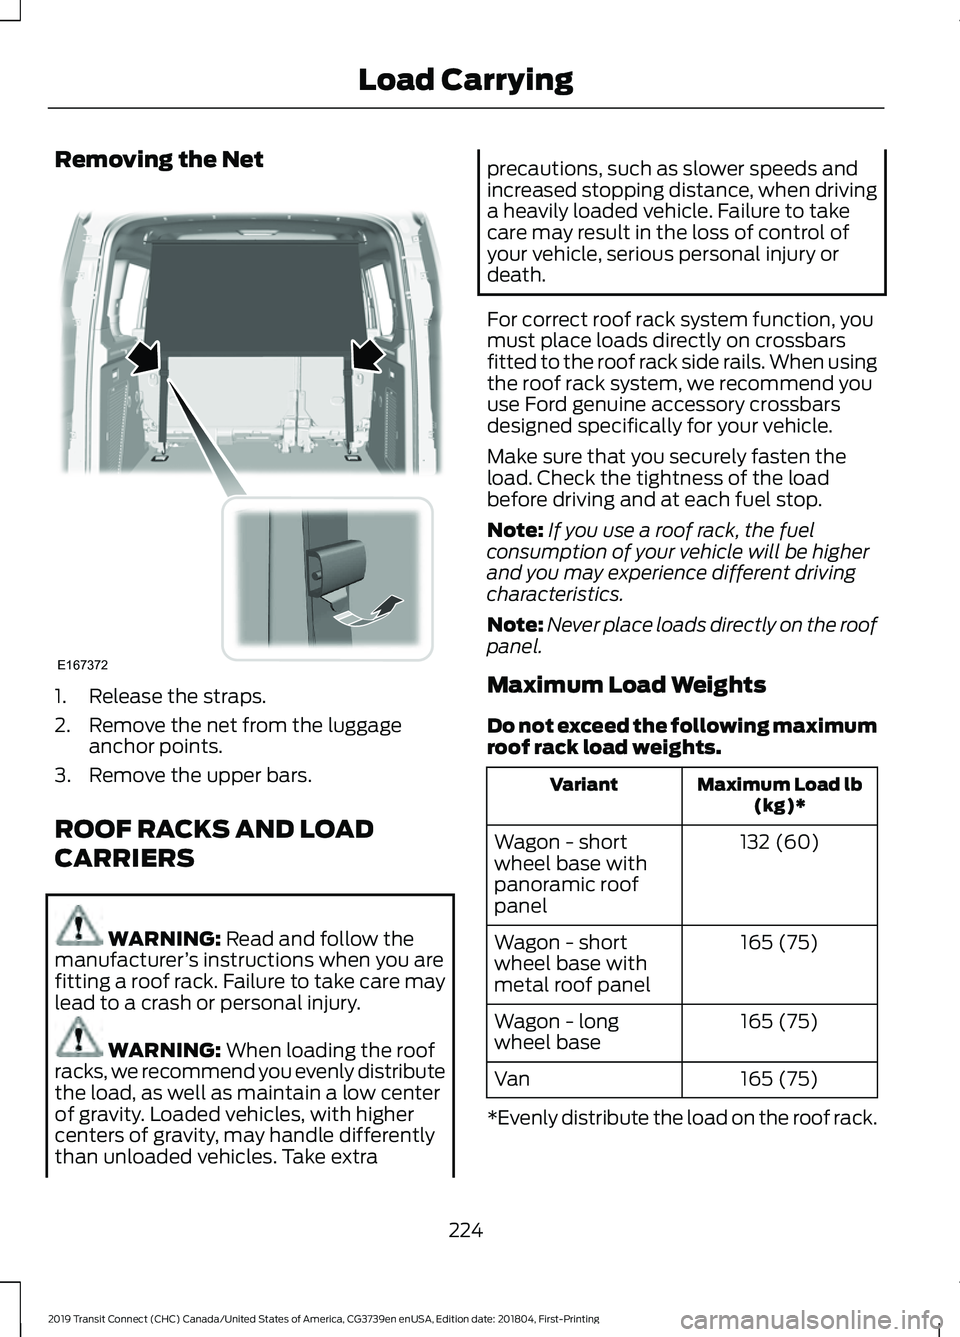 FORD TRANSIT CONNECT 2019  Owners Manual Removing the Net
1. Release the straps.
2. Remove the net from the luggage
anchor points.
3. Remove the upper bars.
ROOF RACKS AND LOAD
CARRIERS WARNING: Read and follow the
manufacturer ’s instruct